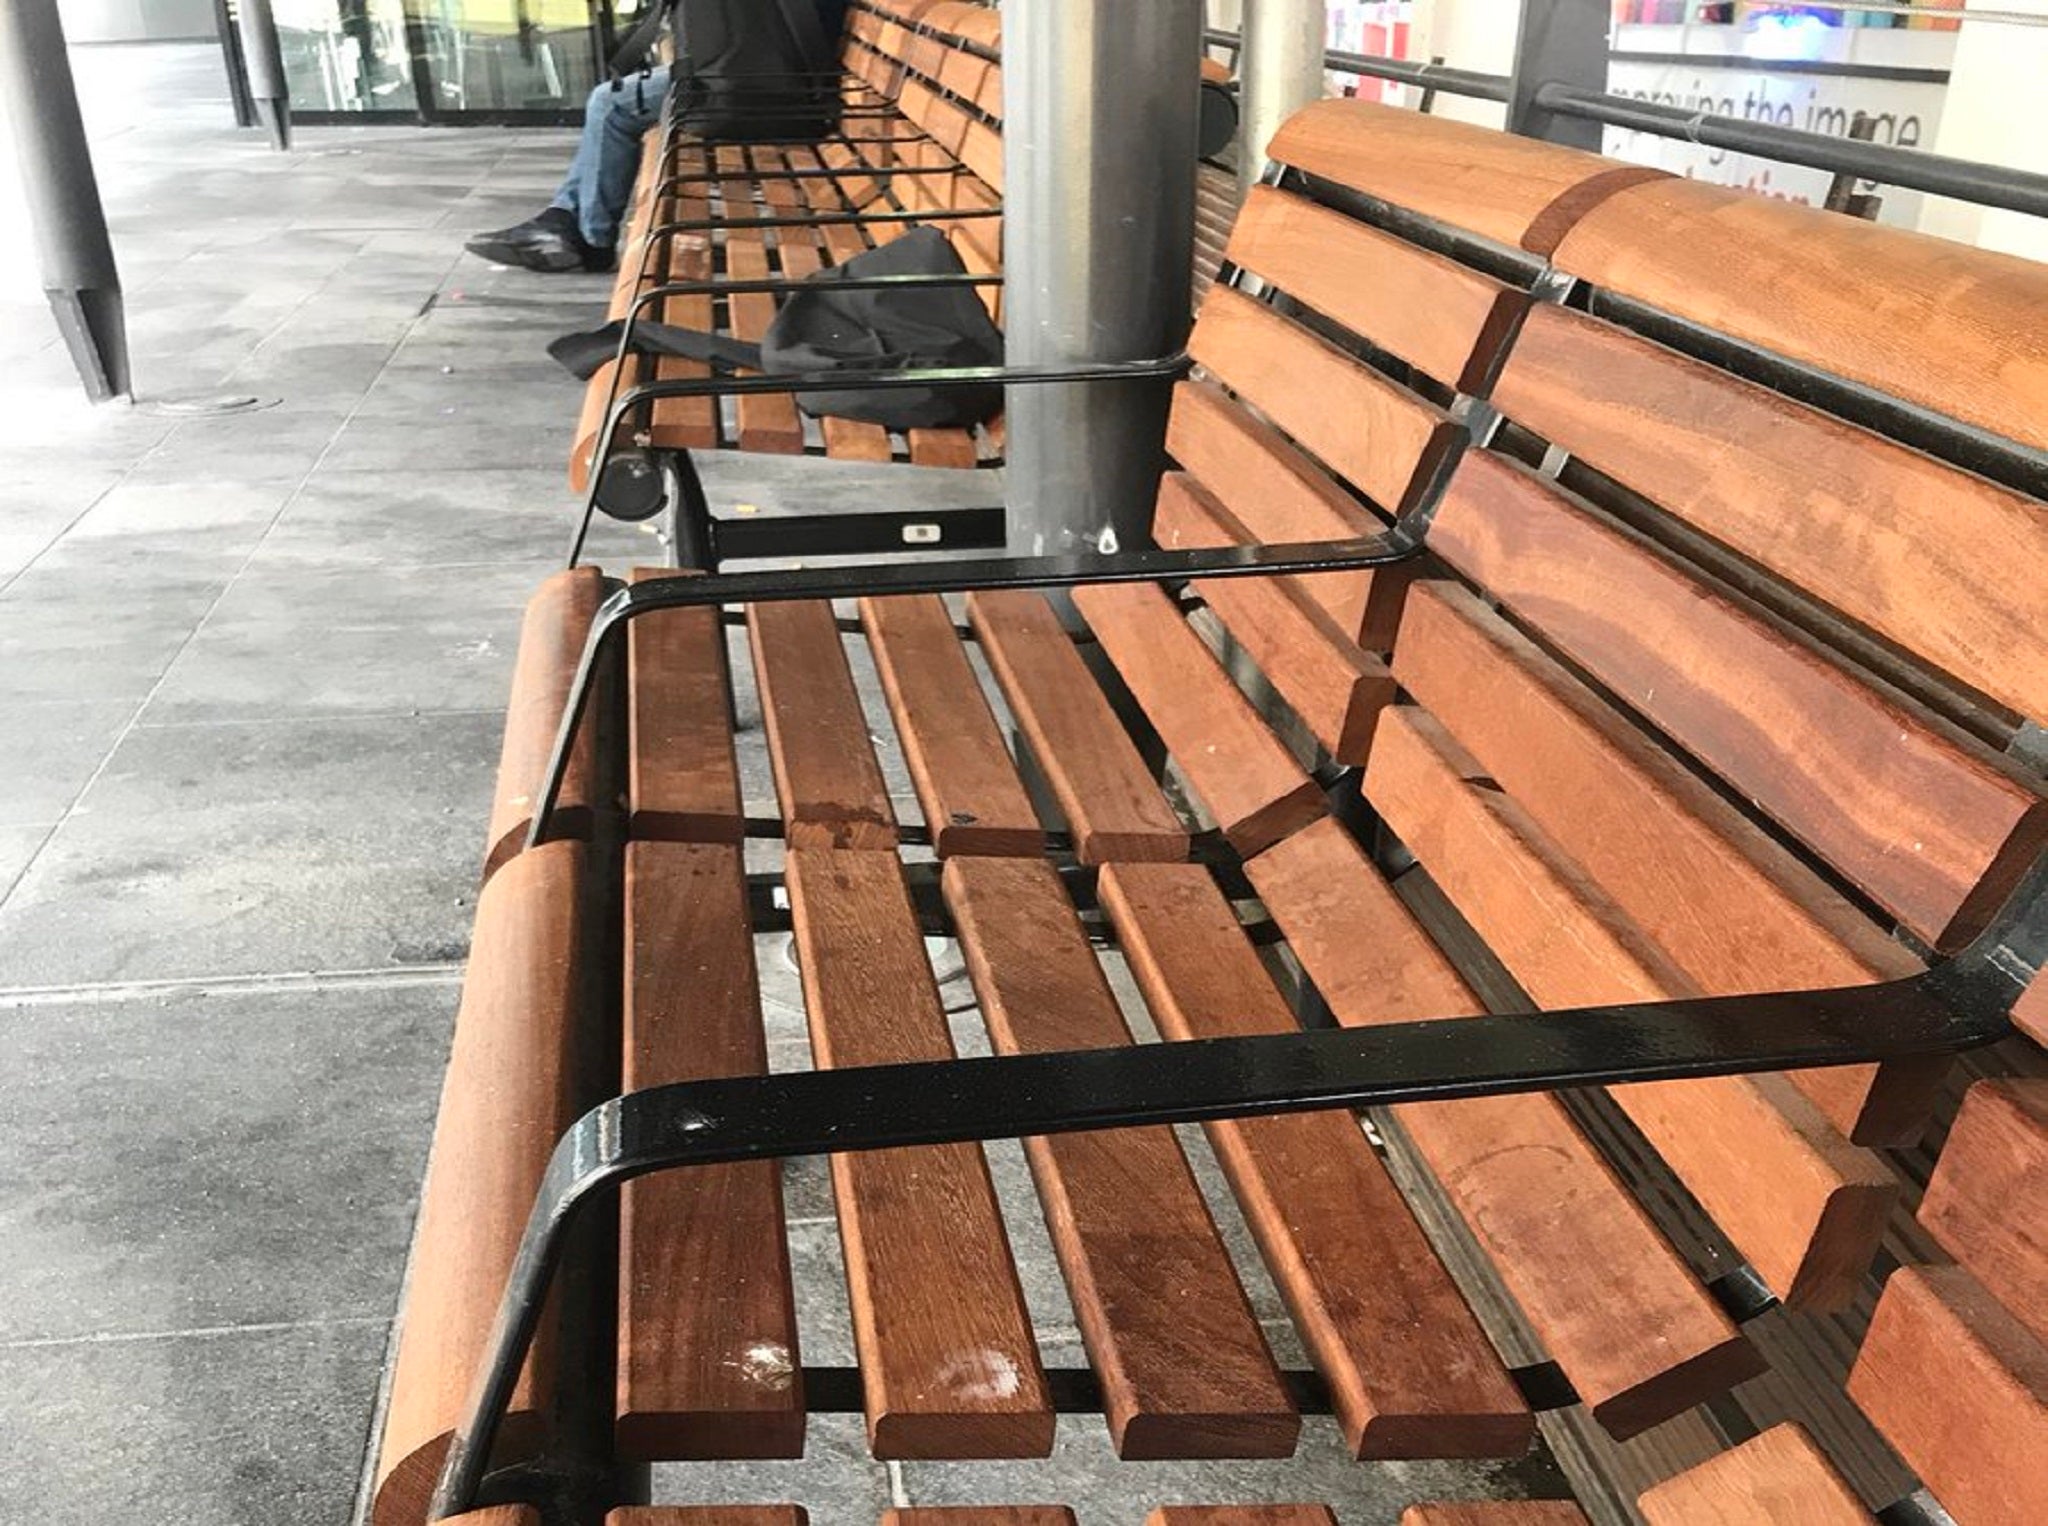 New benches which include metal armrests were recently installed on the LSE campus in central London